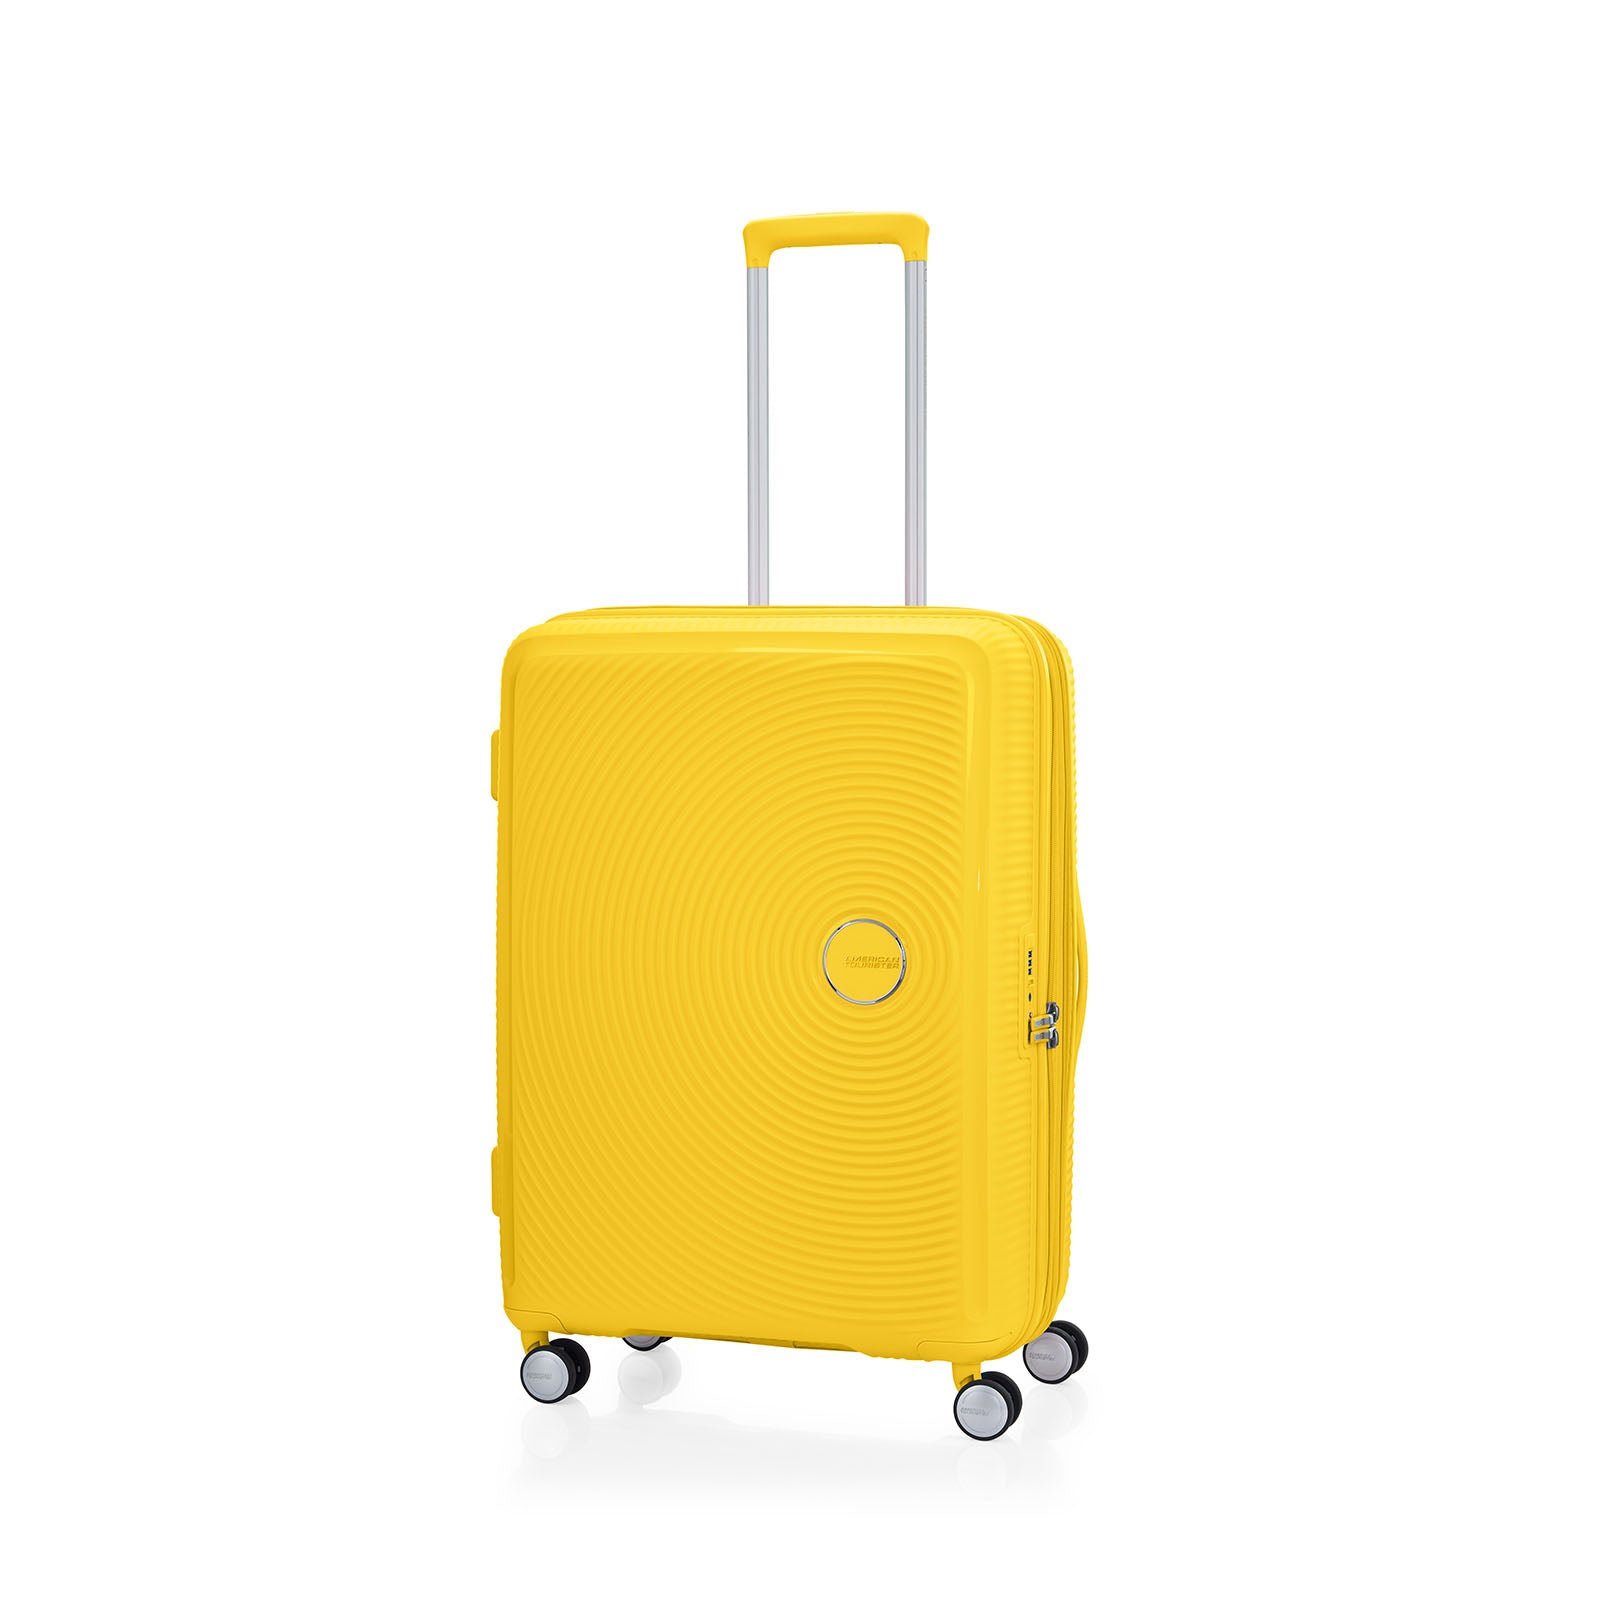 American-Tourister-Curio-2-69cm-Suitcase-Golden-Yellow-Angle